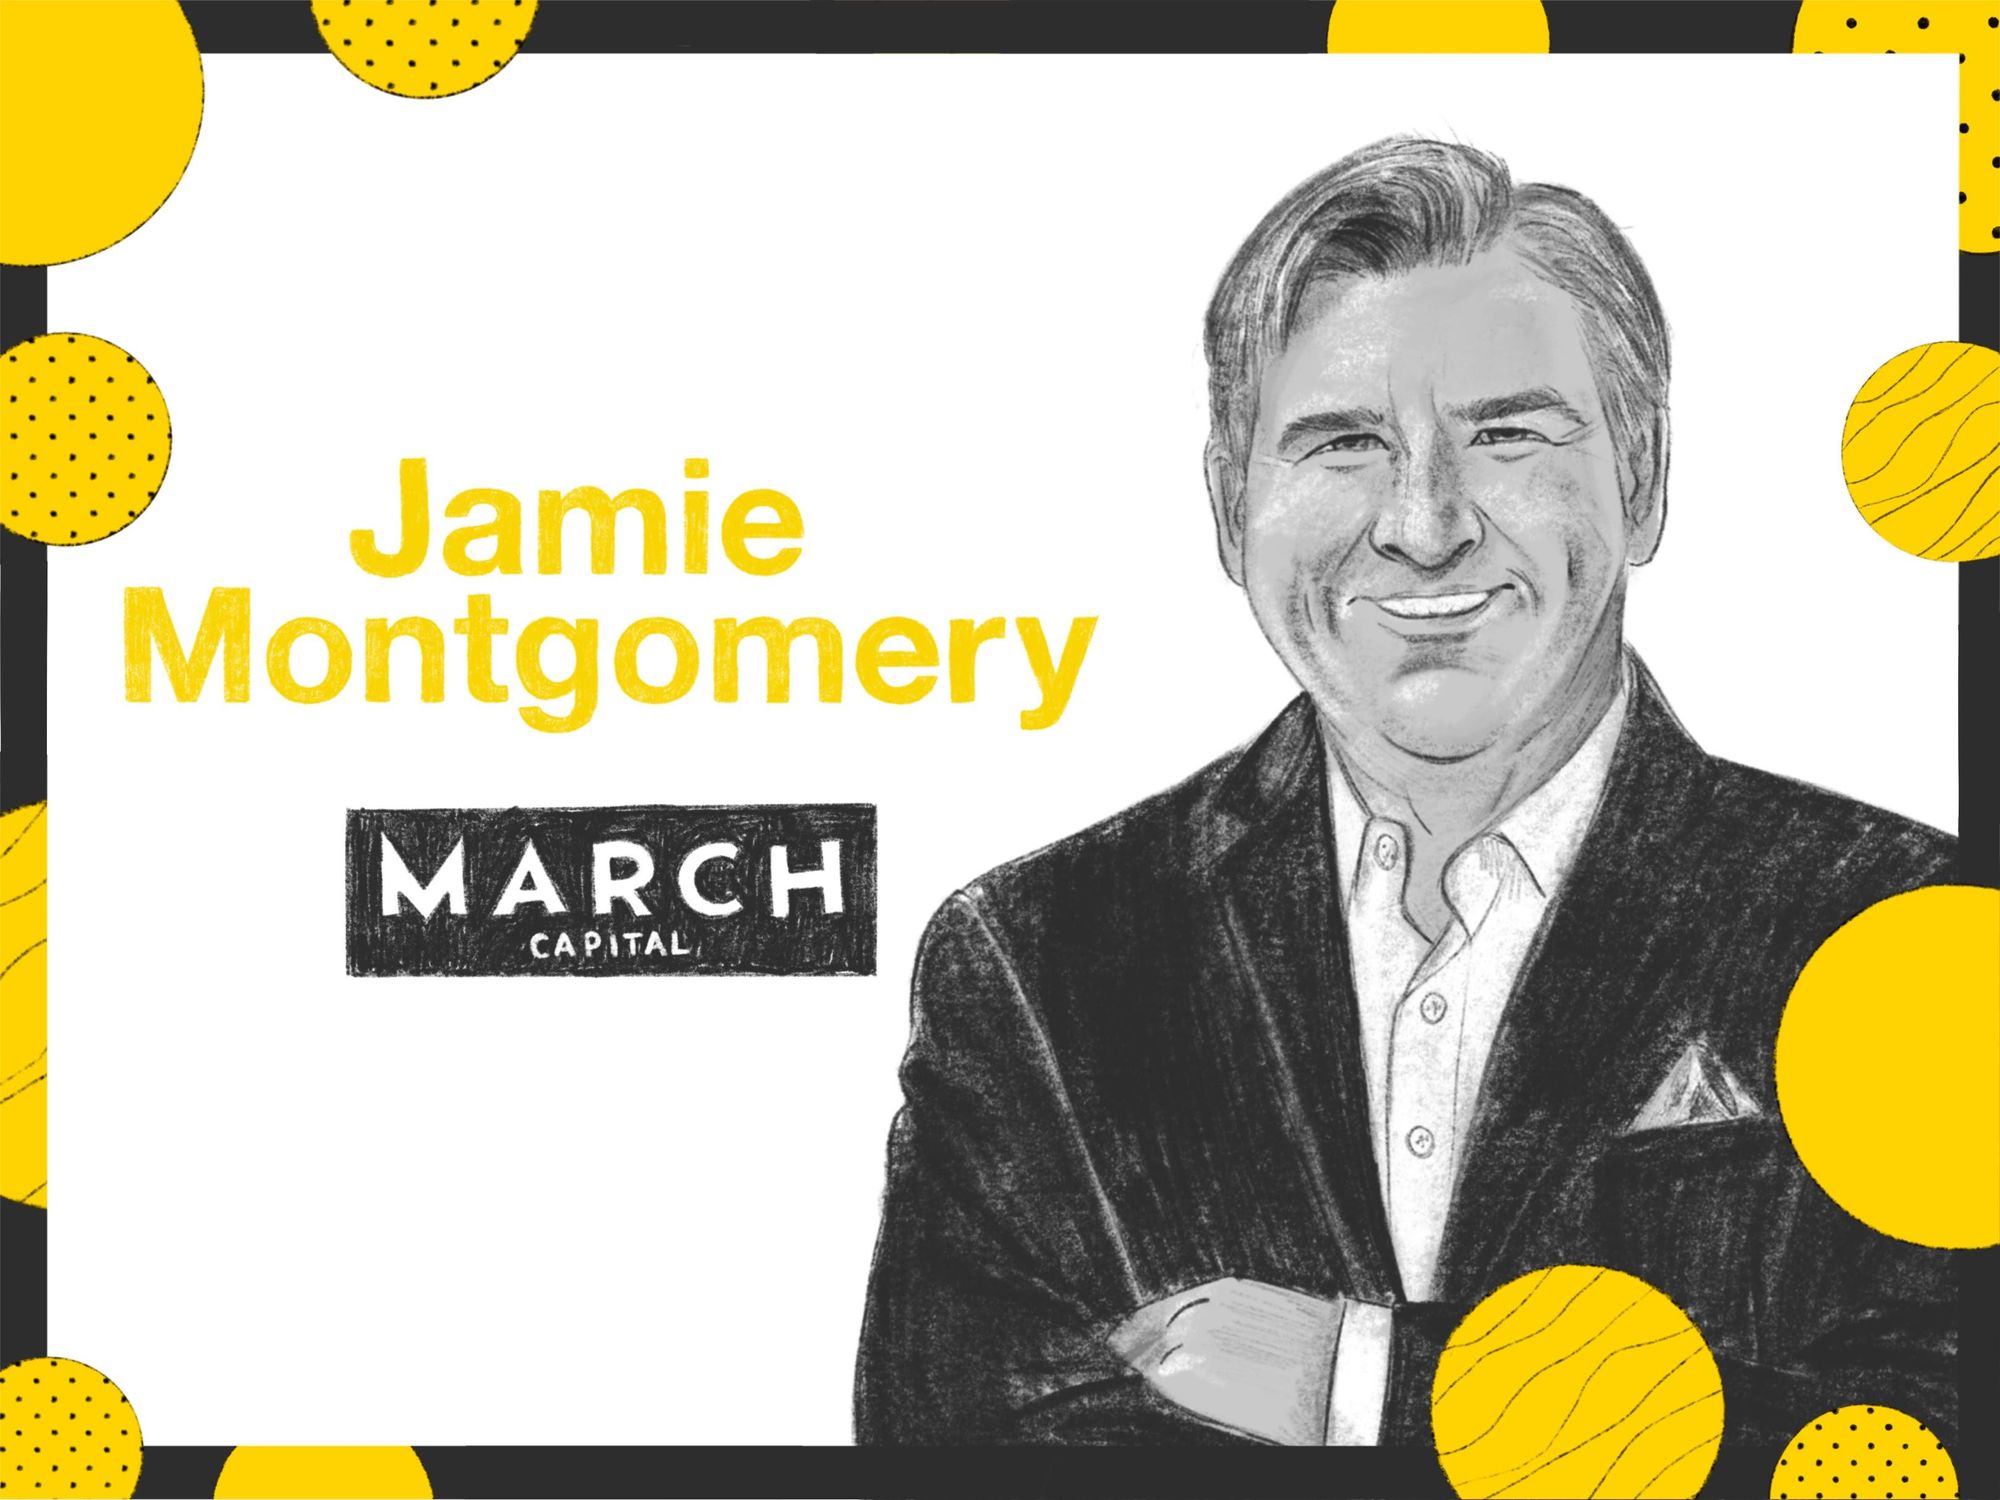 March Capital's Jamie Montgomery on the Intersection of Innovation and Creativity